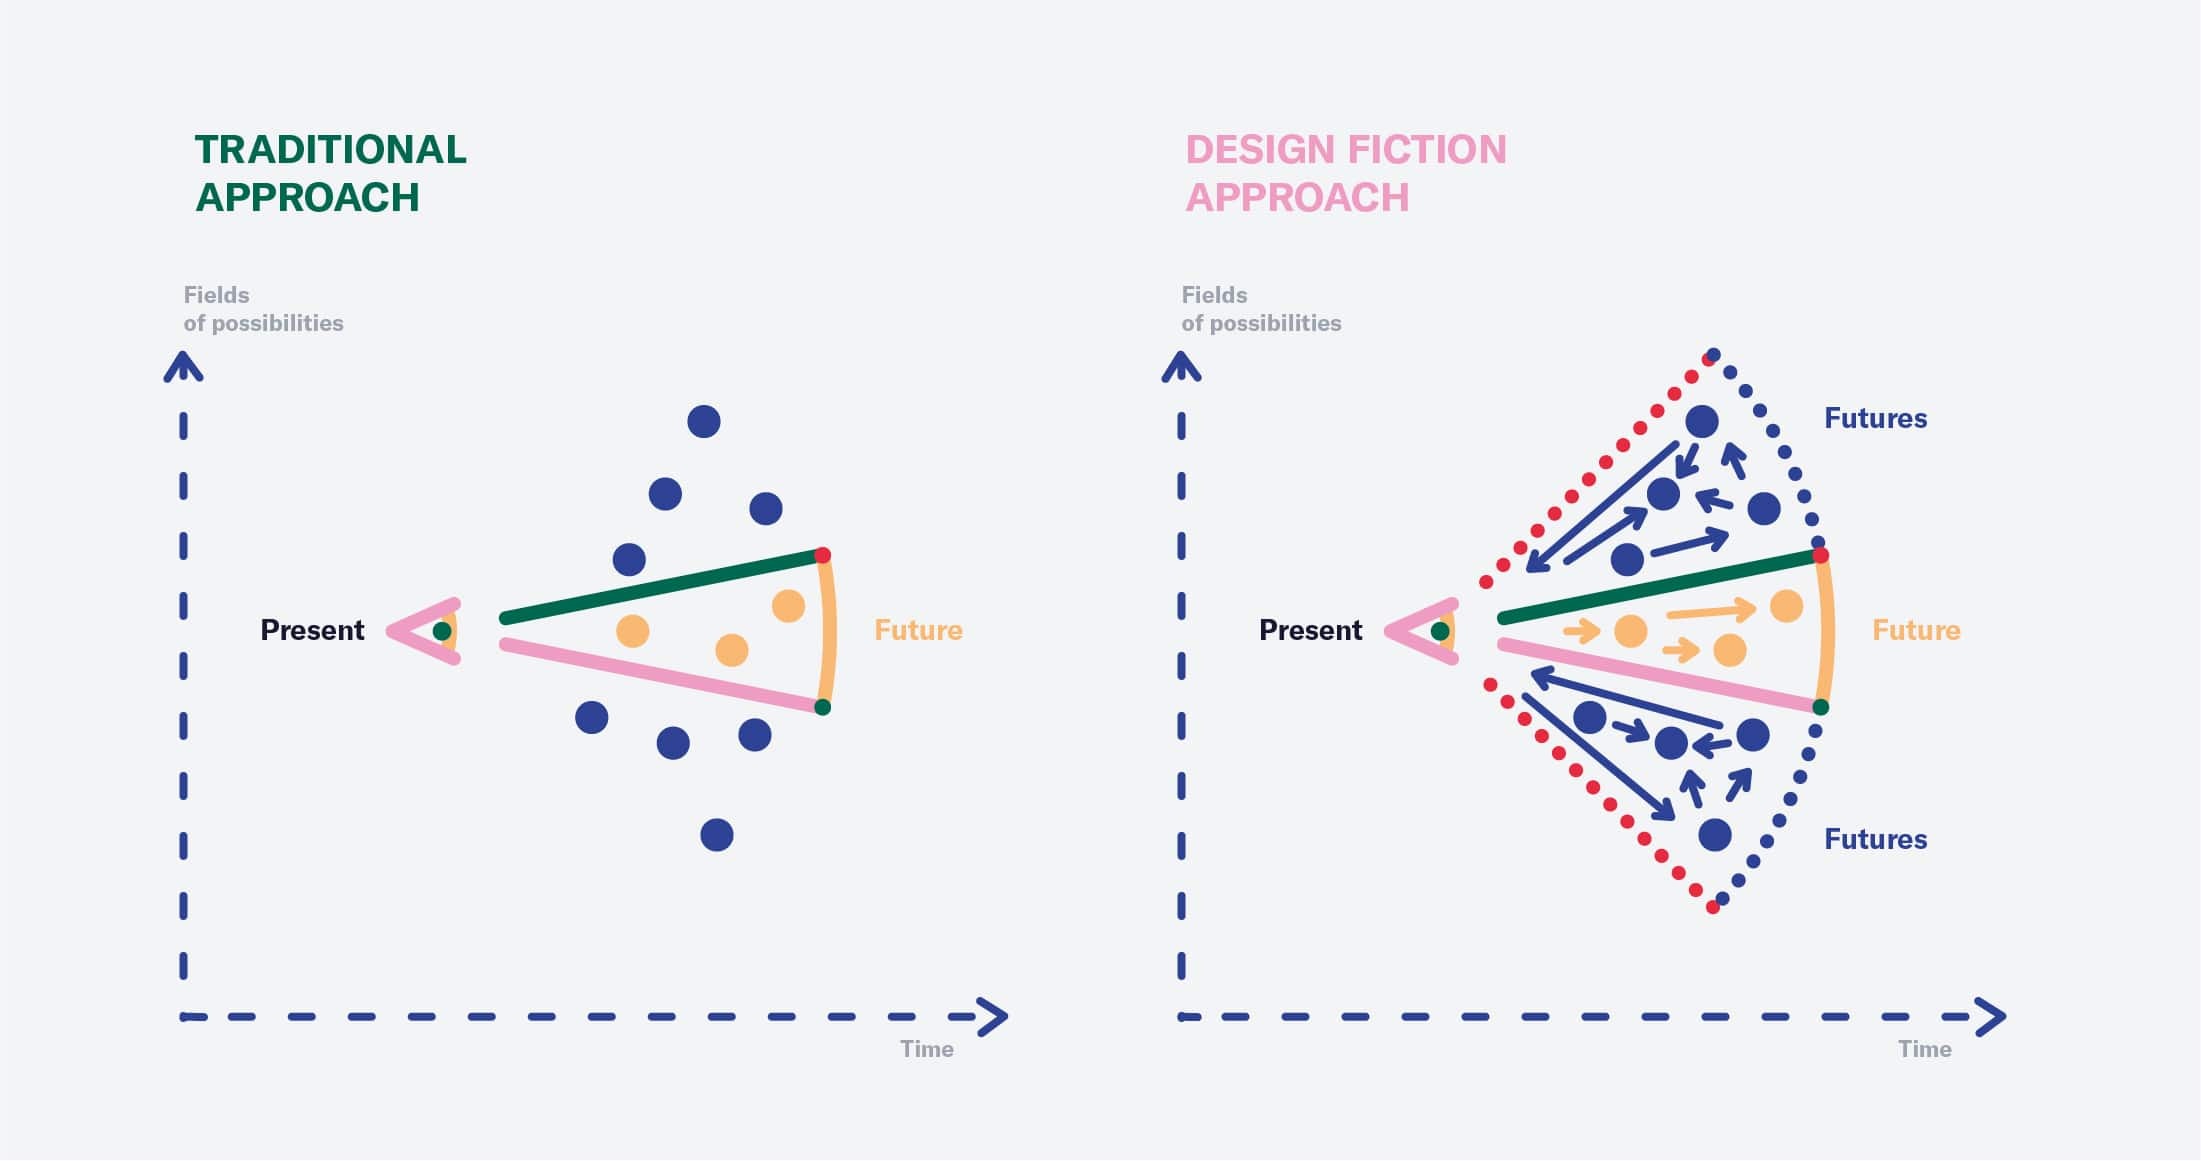 Comparative diagram of the traditional approach and the design fictions approach